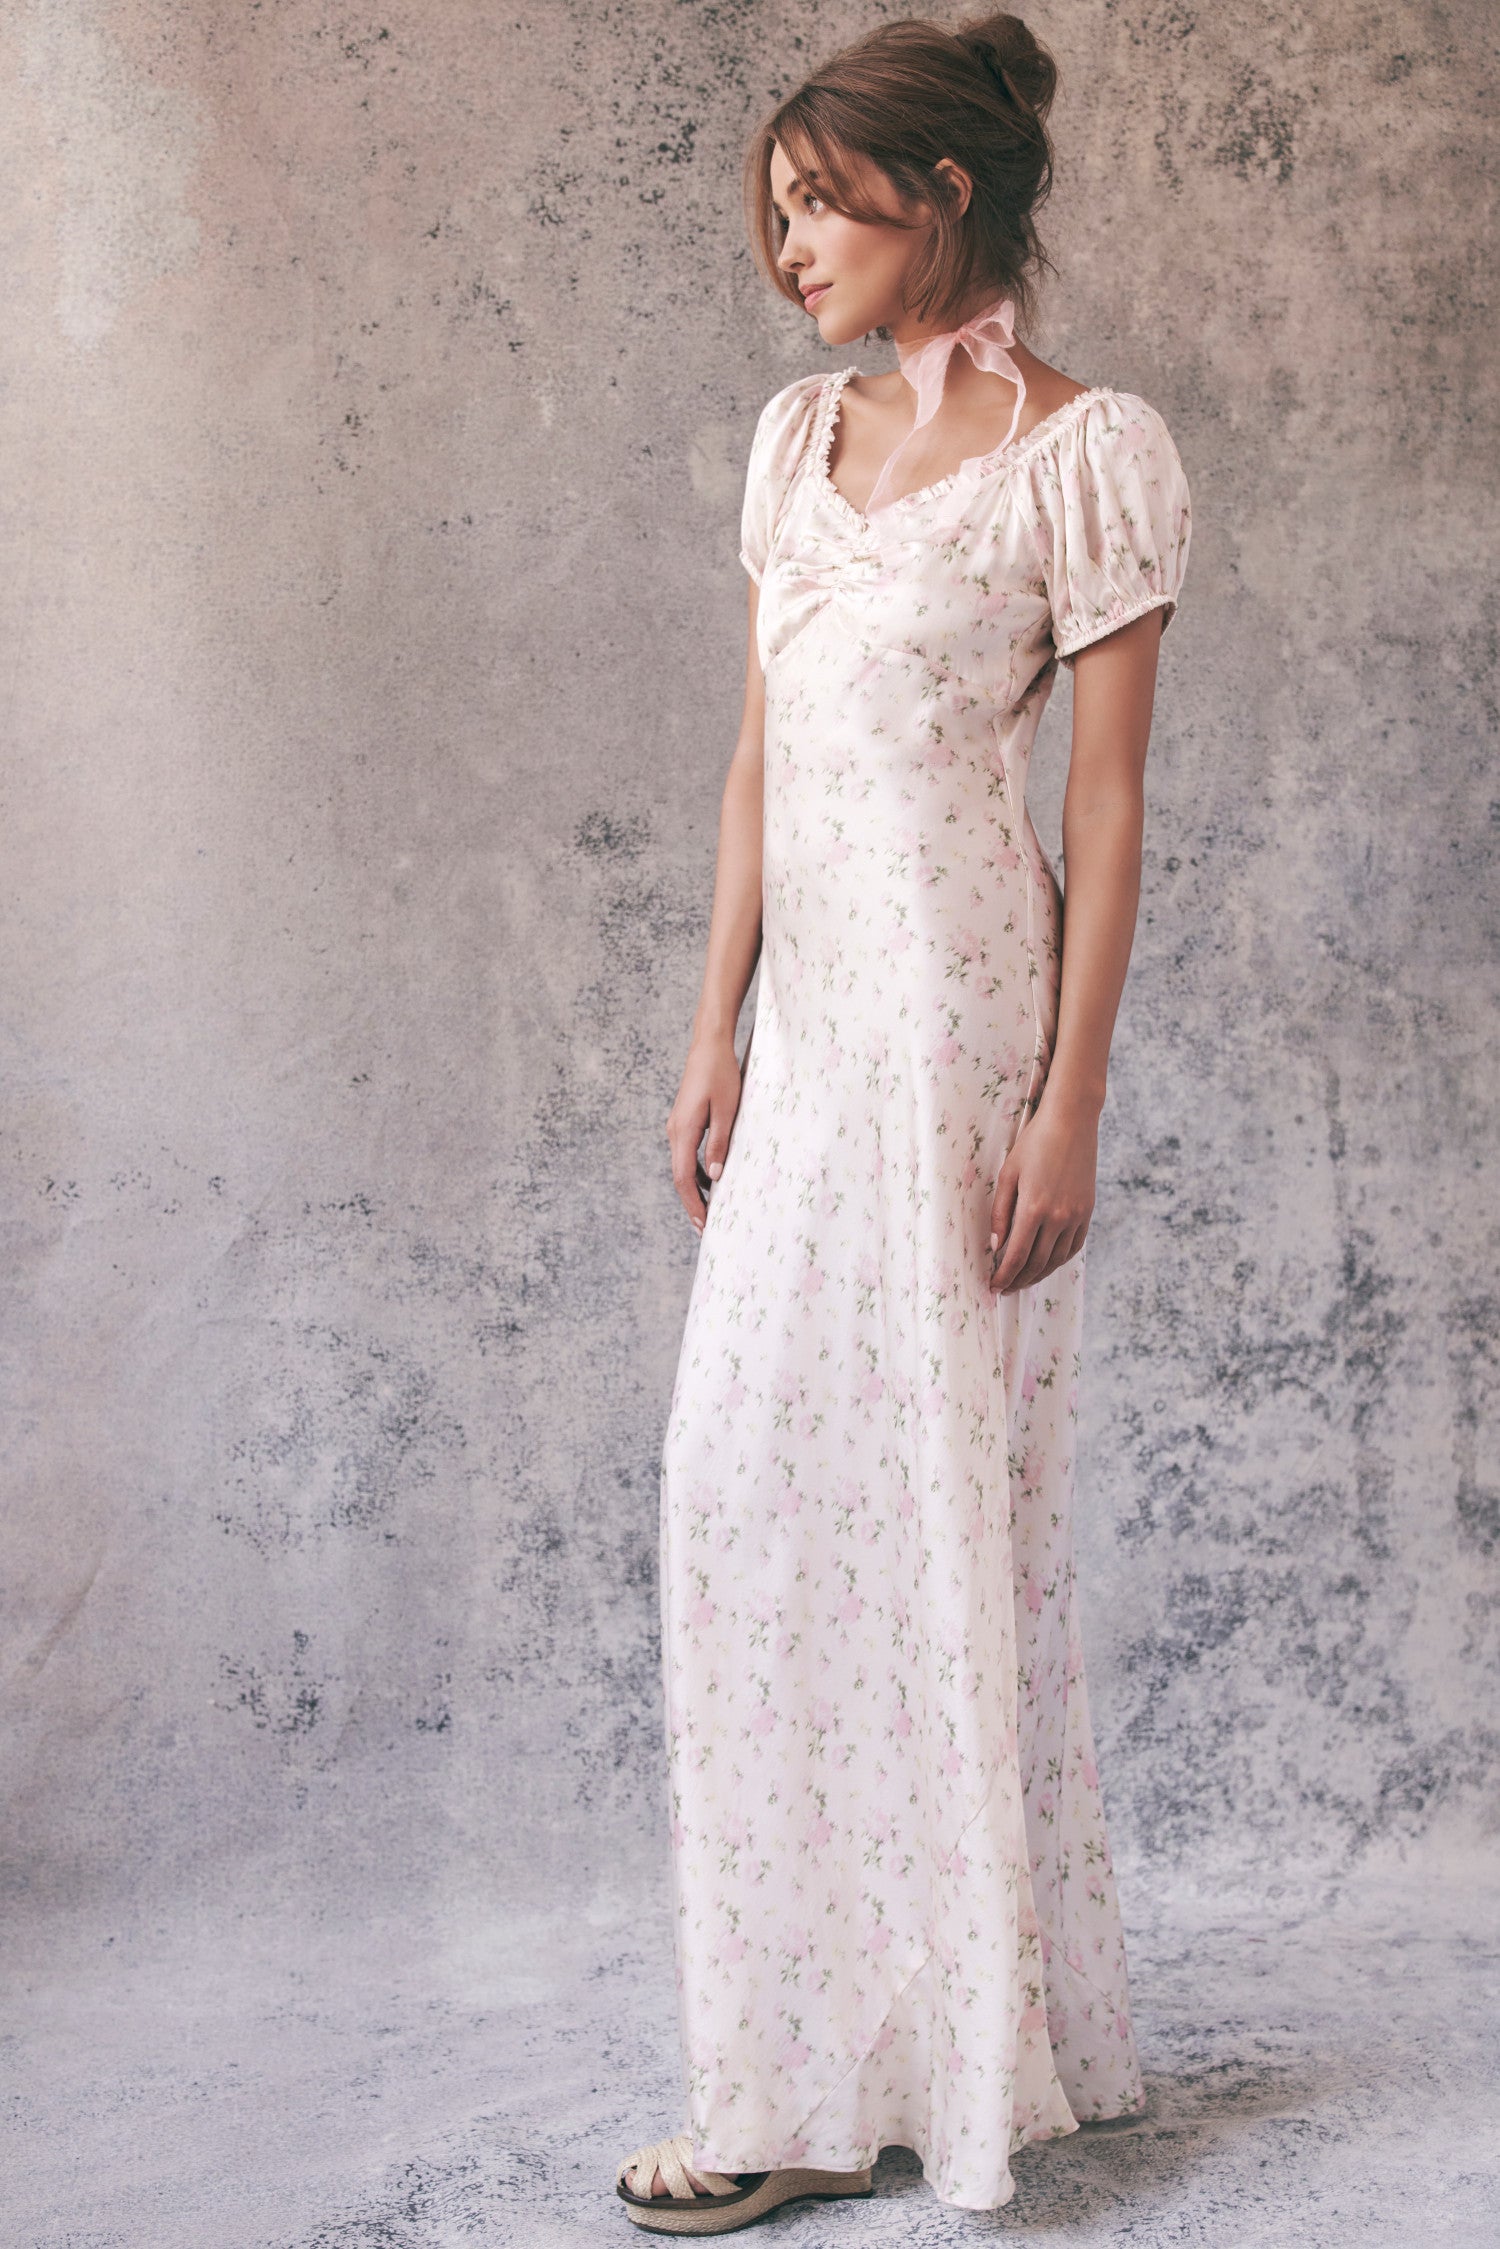 Side image of model wearing cream floral maxi dress